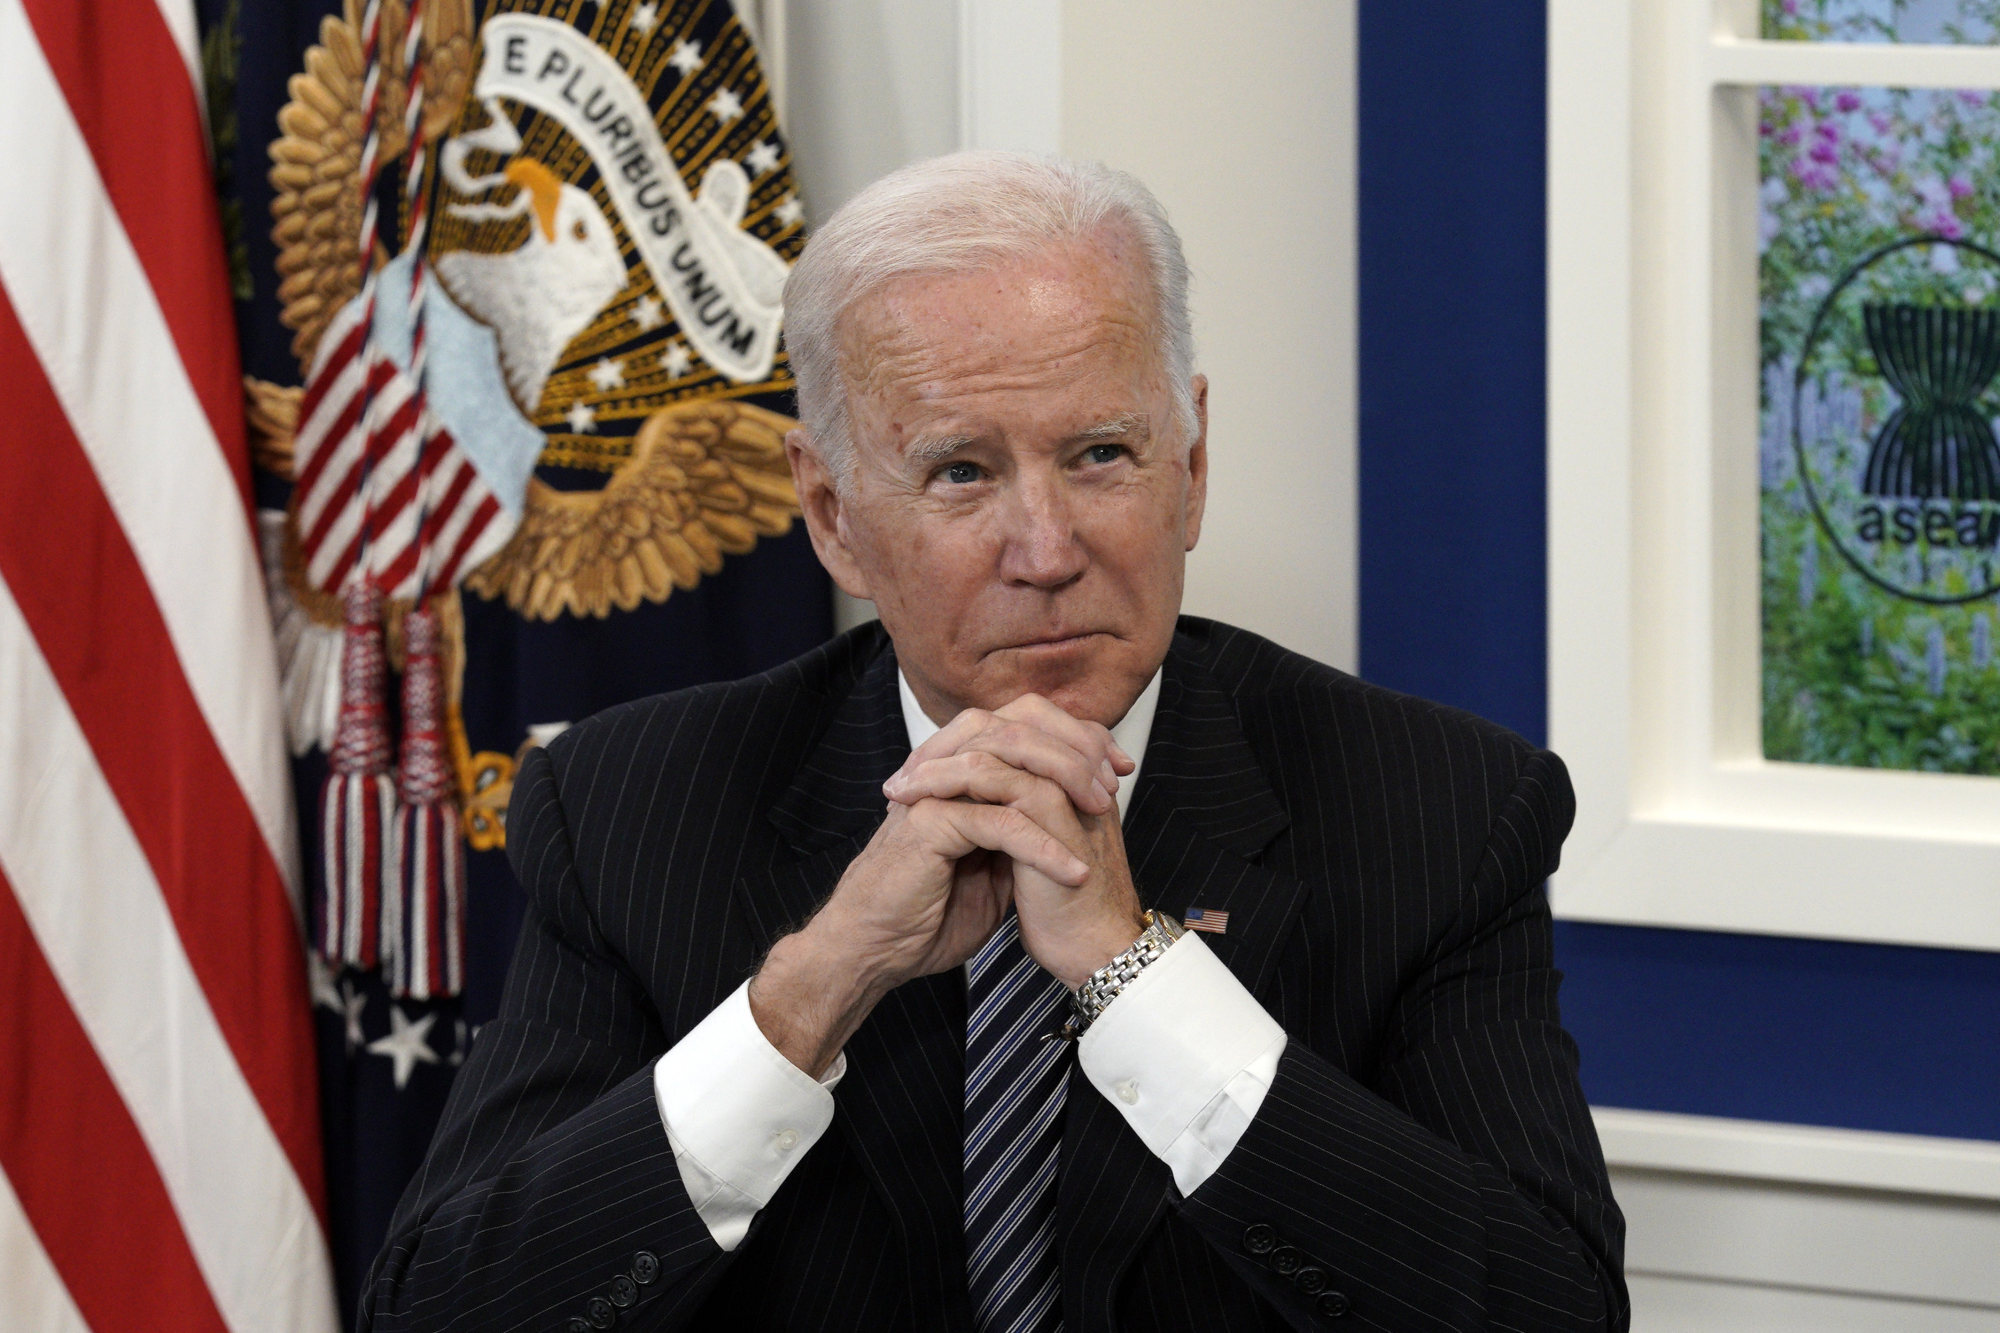 US President Joe Biden attends via video link the US-Asean summit on October 26 last year, from the South Court Auditorium at the White House in Washington, D.C. Photo: Abaca Press/TNS